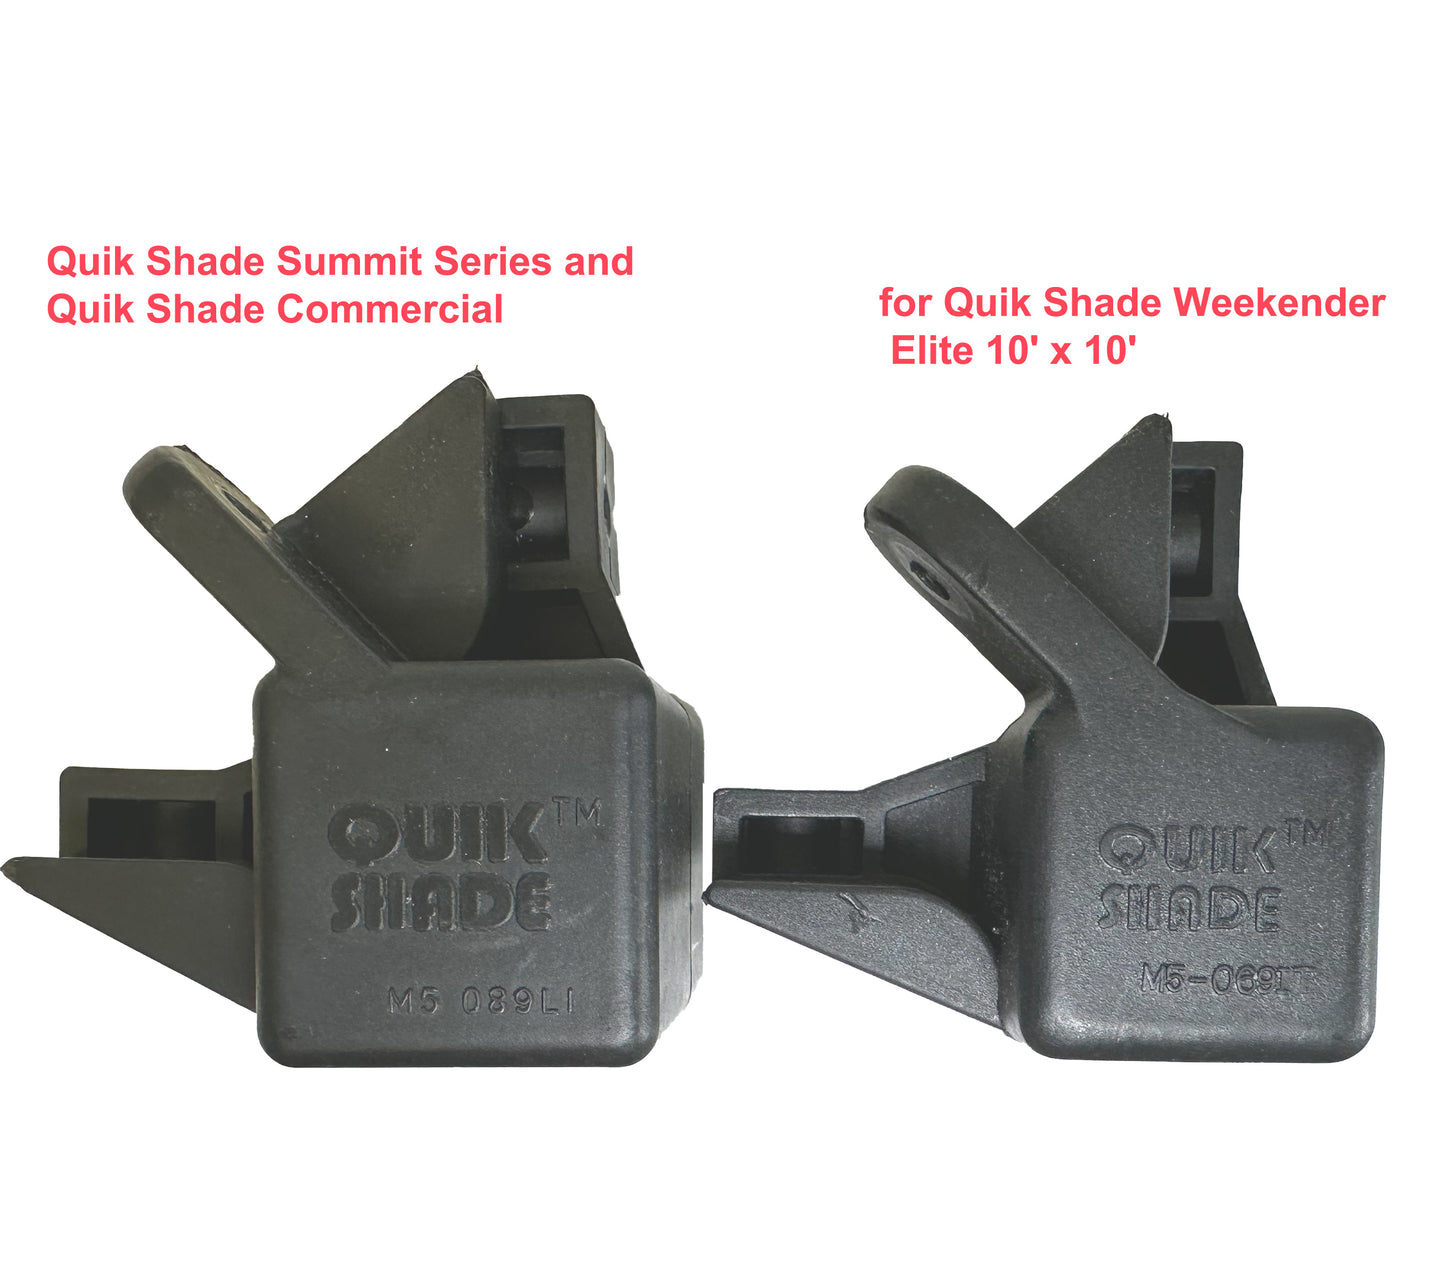 Quik Shade Summit Series SX170, Quik Shade Commercial Canopy Pole Cap Leg Connector Replacement Part